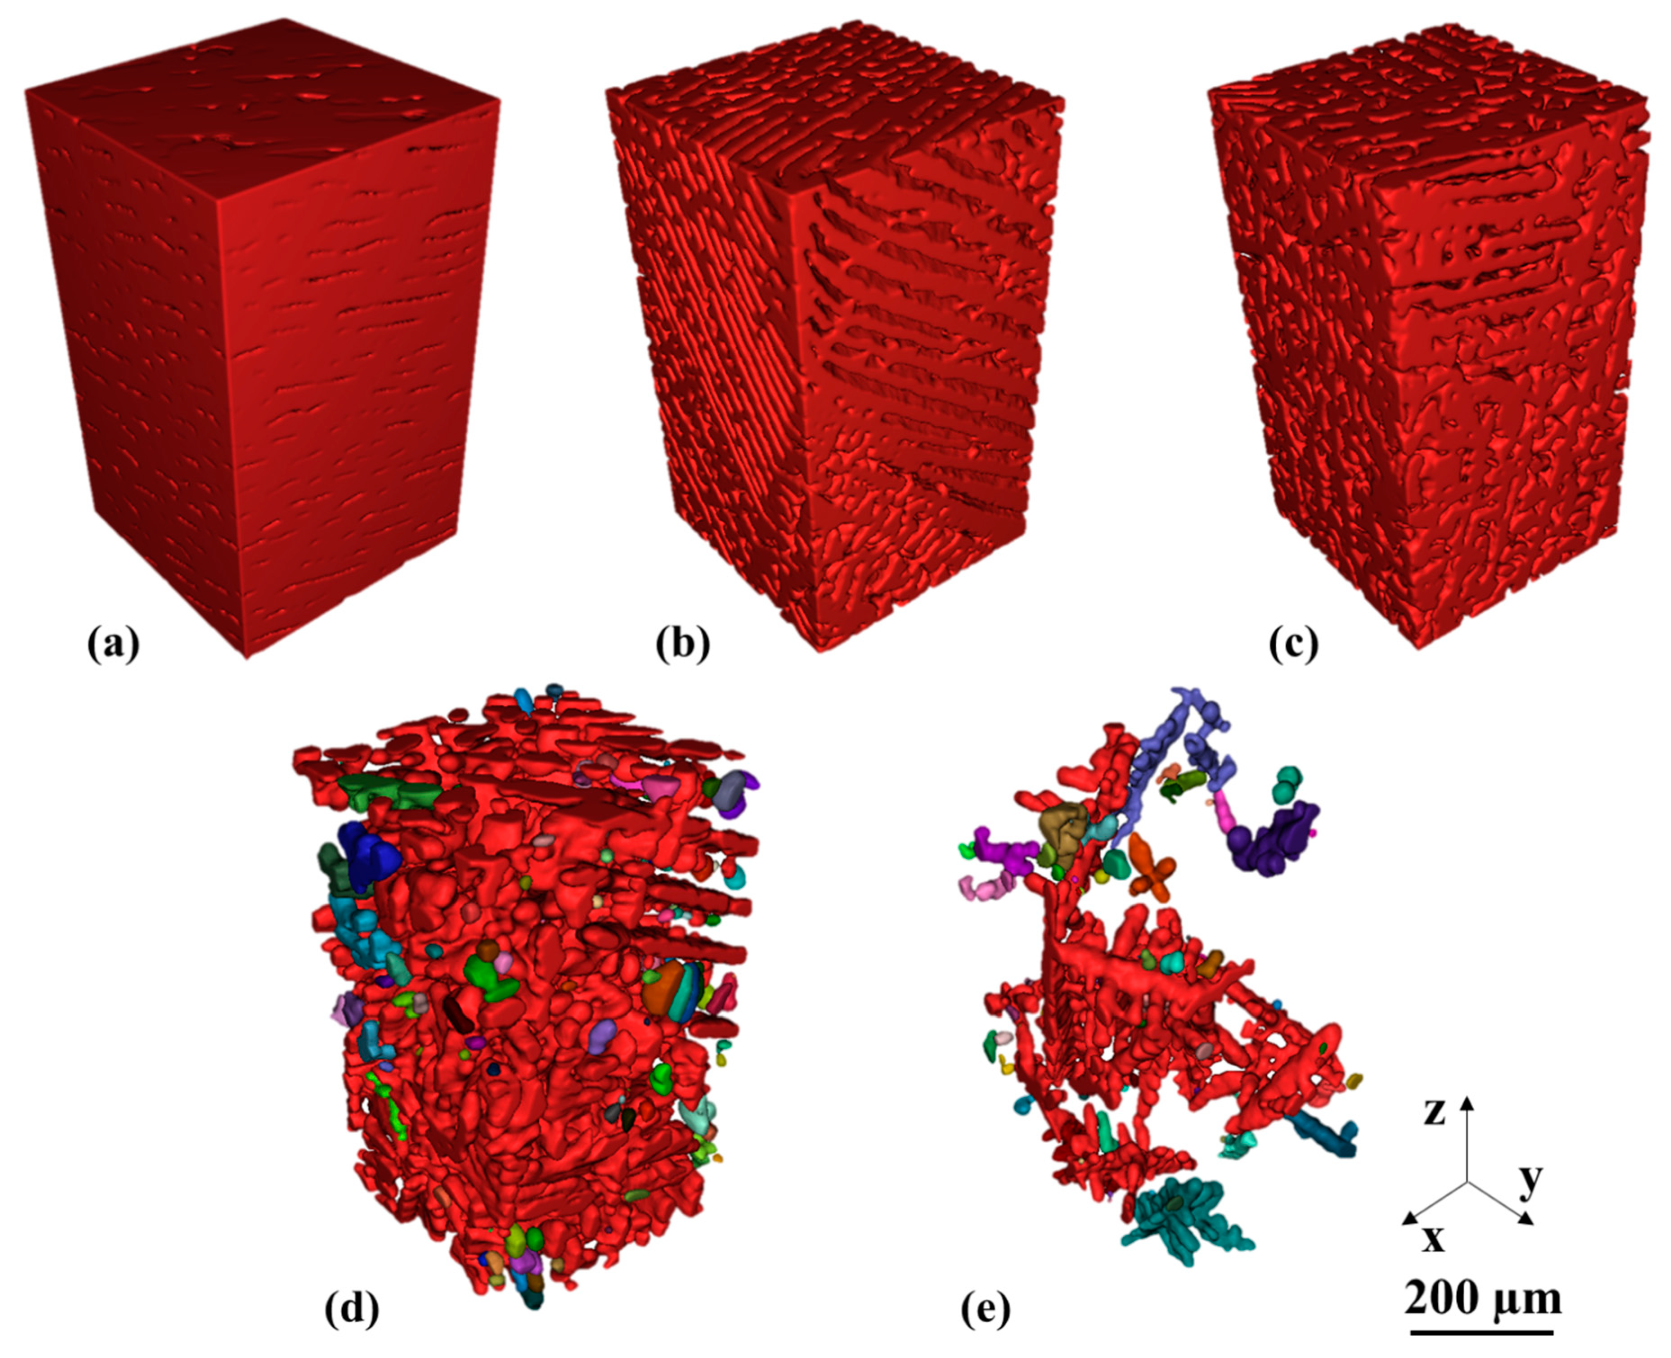 Materials Free Full Text Analysis Of Sn Bi Solders X Ray Micro Computed Tomography Imaging And Microstructure Characterization In Relation To Properties And Liquid Phase Healing Potential Html